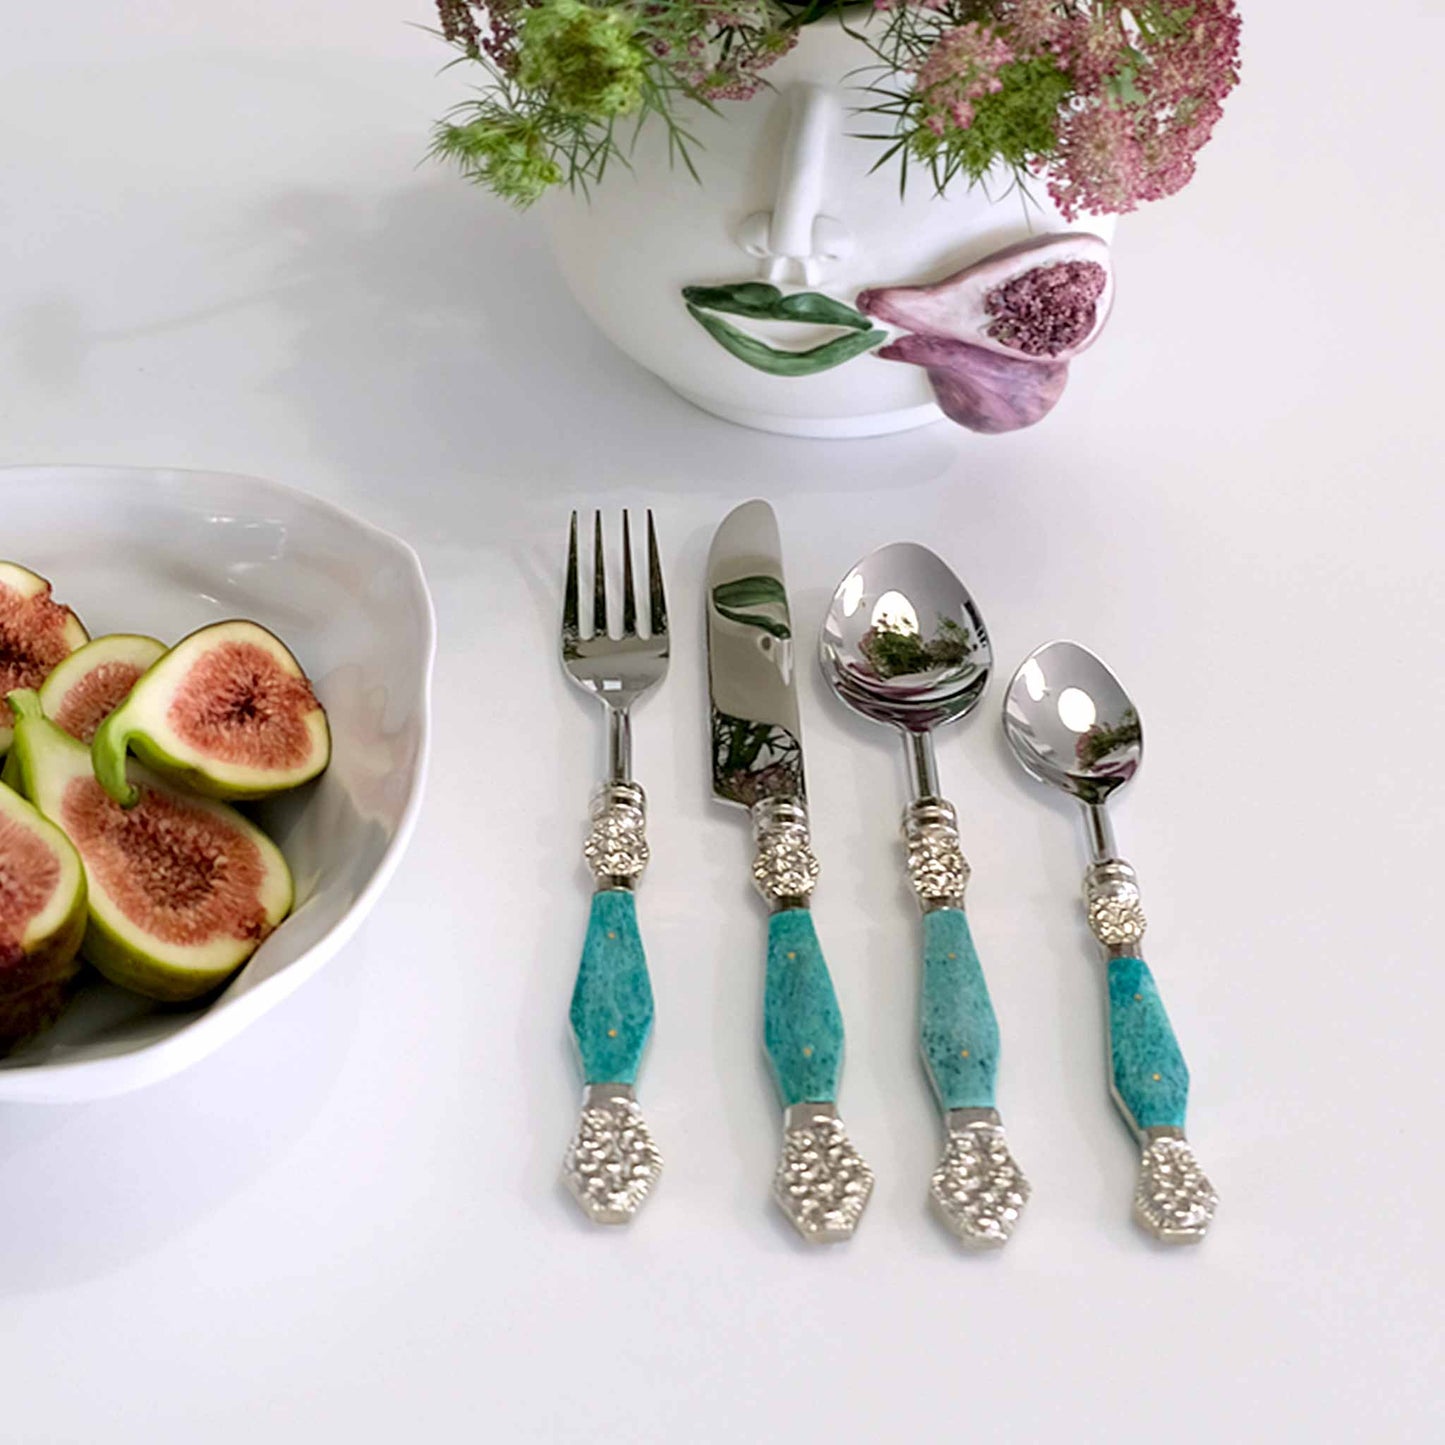 ZA Collective 4 Piece Turquoise Cutlery Set